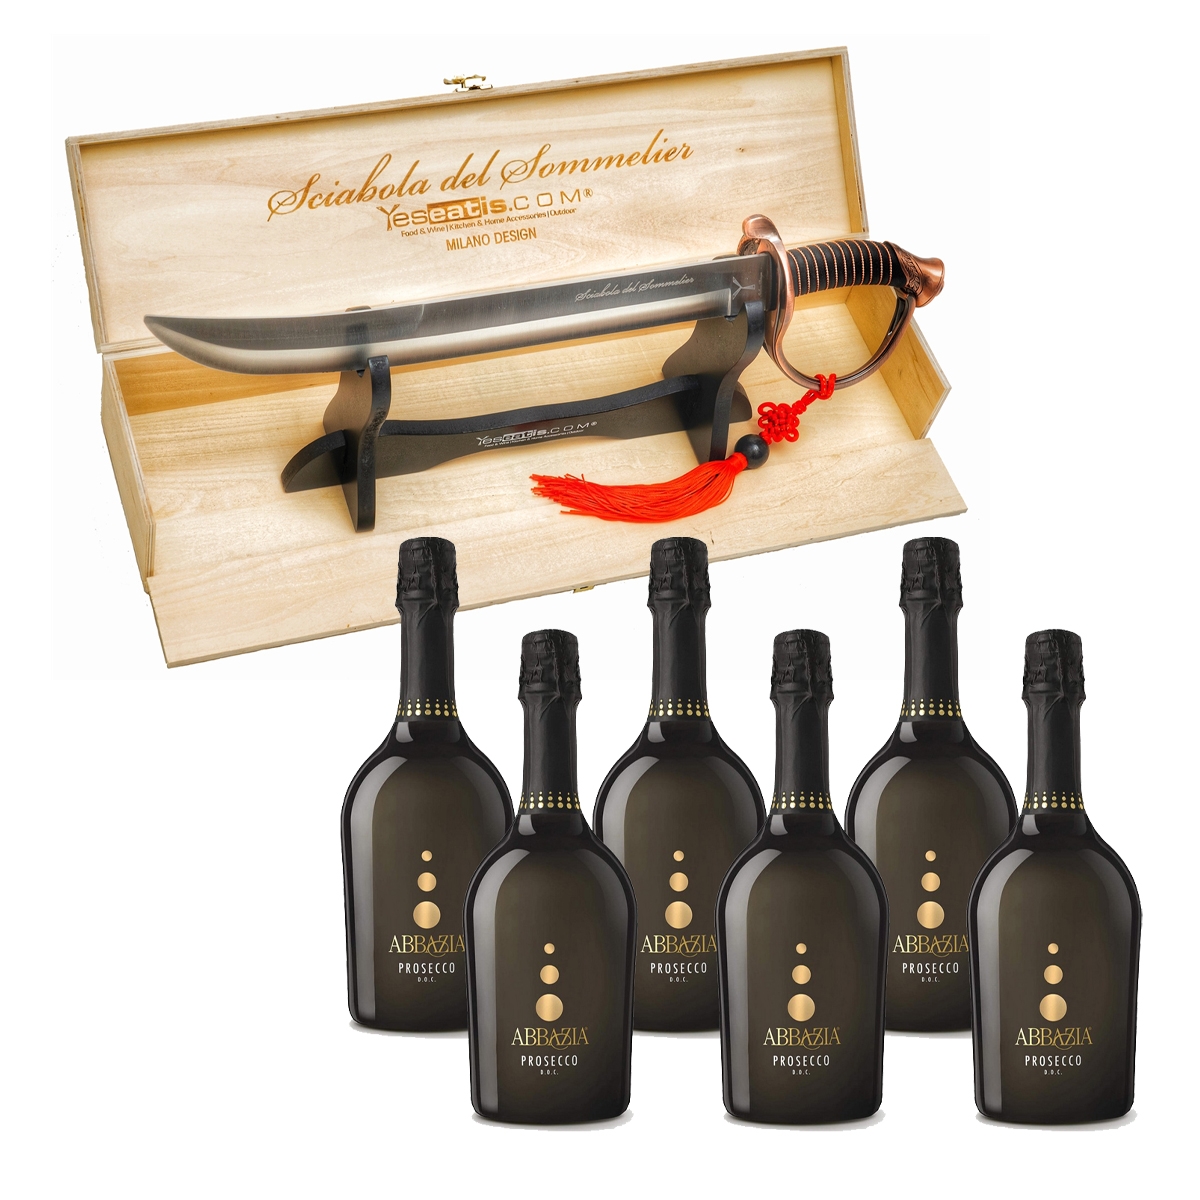 Sommelier's Saber Bronze Handle with 6 Bottles of Prosecco DOC Abbazia